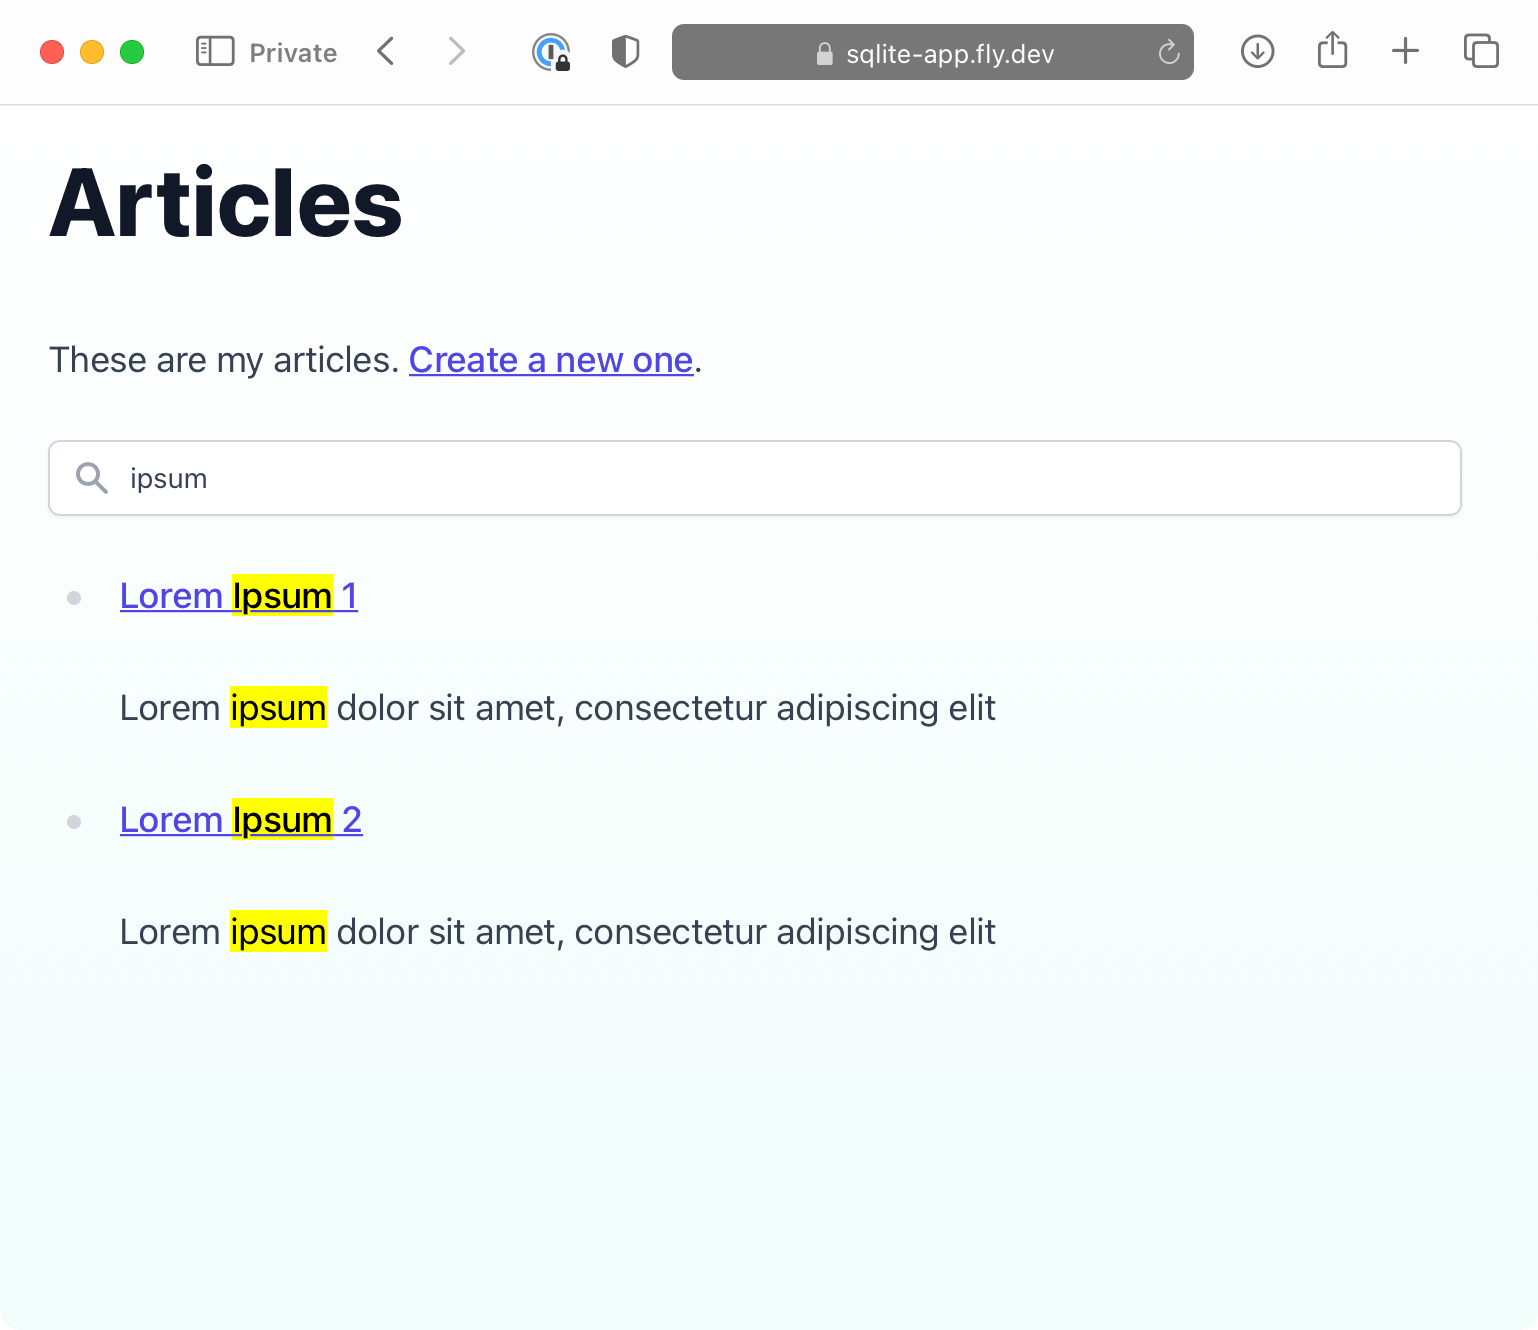 A screenshot of the sqlite-app web app, showing an article search.